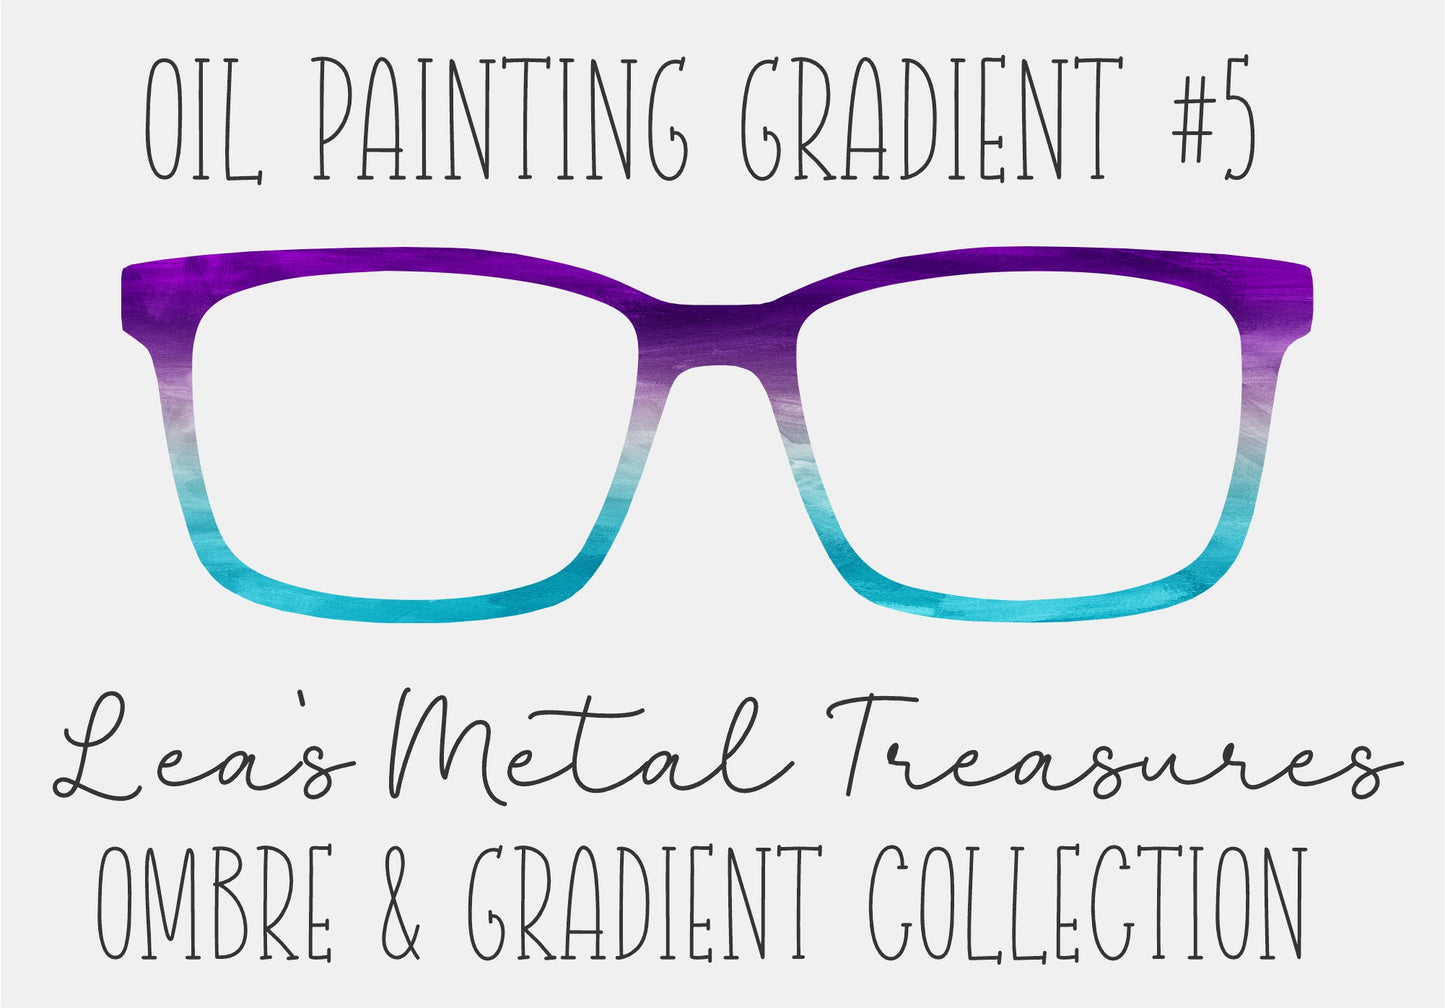 OIL PAINTING GRADIENT 5 Eyewear Frame Toppers COMES WITH MAGNETS